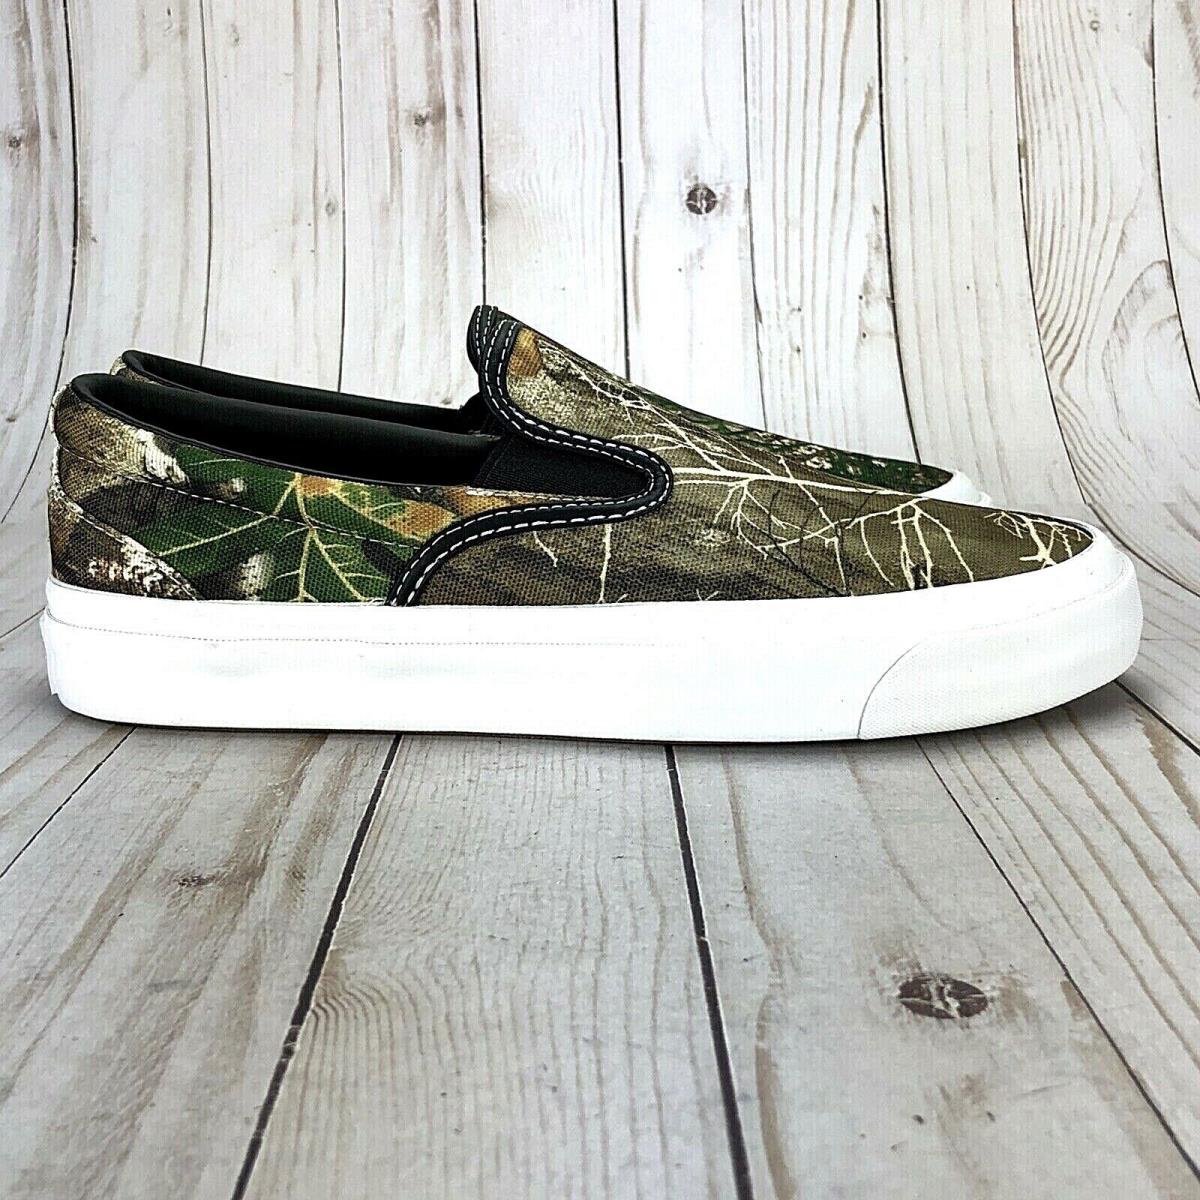 Converse Mens One Star Slip On Shoes Realtree Camouflage 168663C